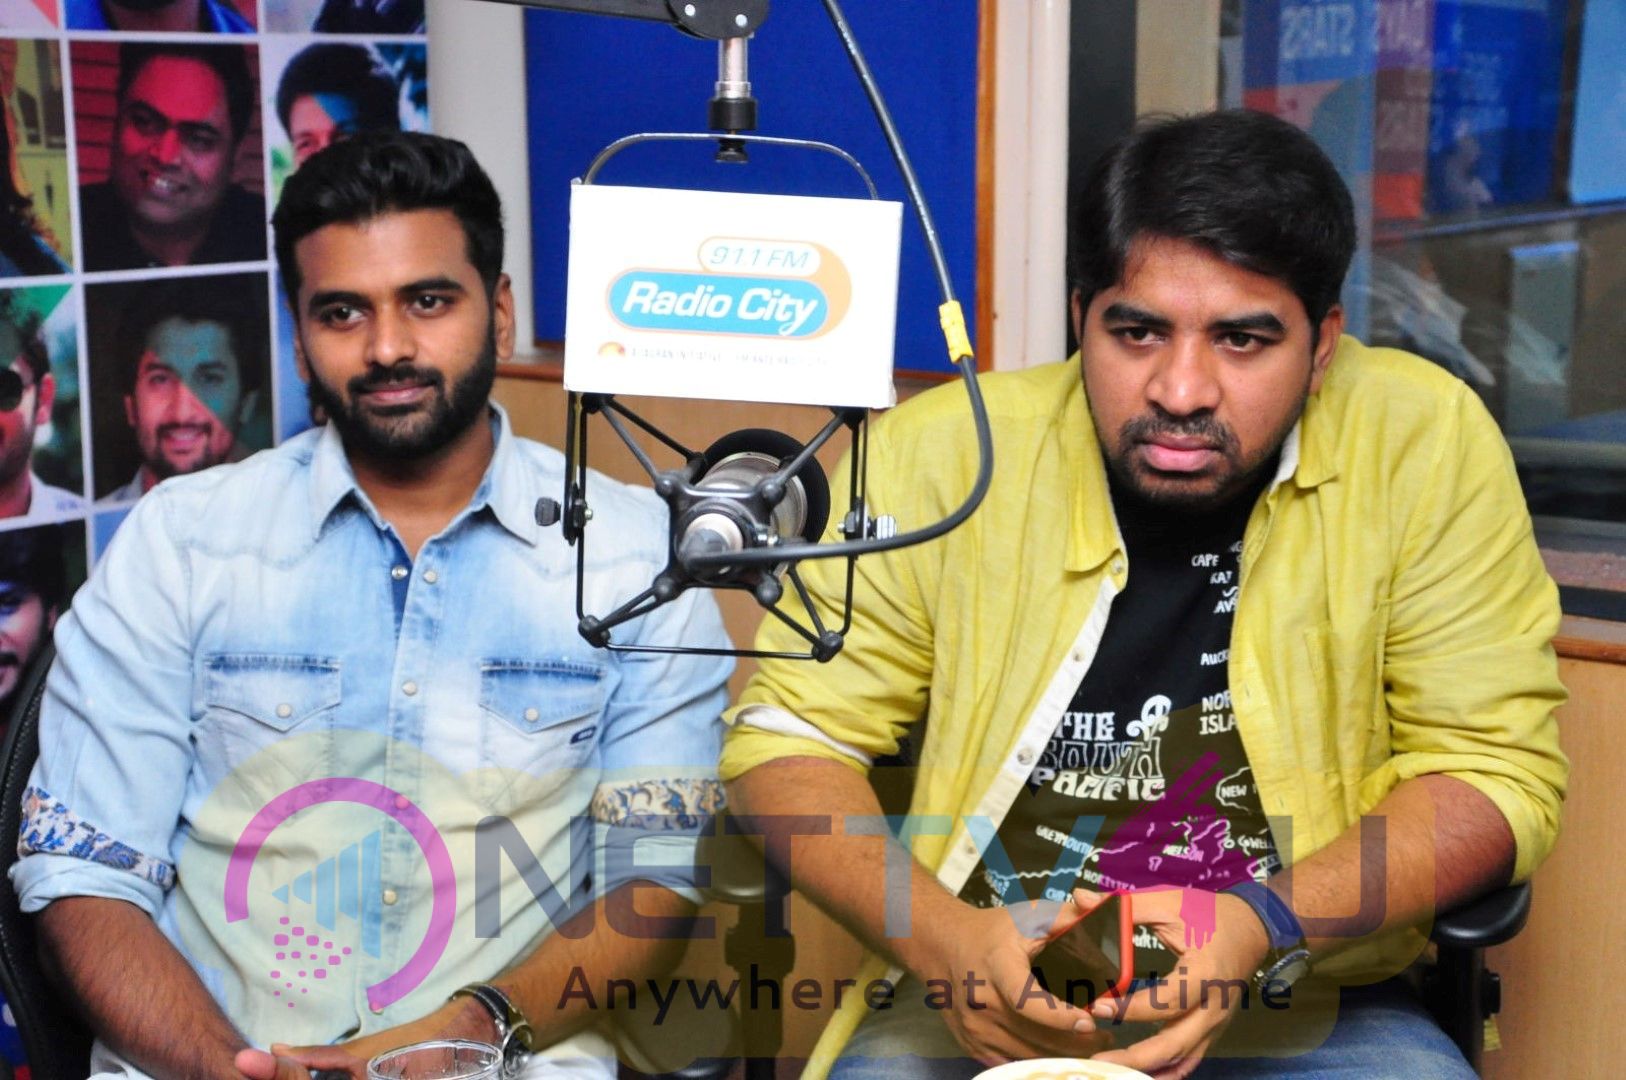  Second Single Collegee Agelona Song From Ee Nagaranika Emaindhi Exclusively Launched  In Radio City Superb Images Telugu Galler